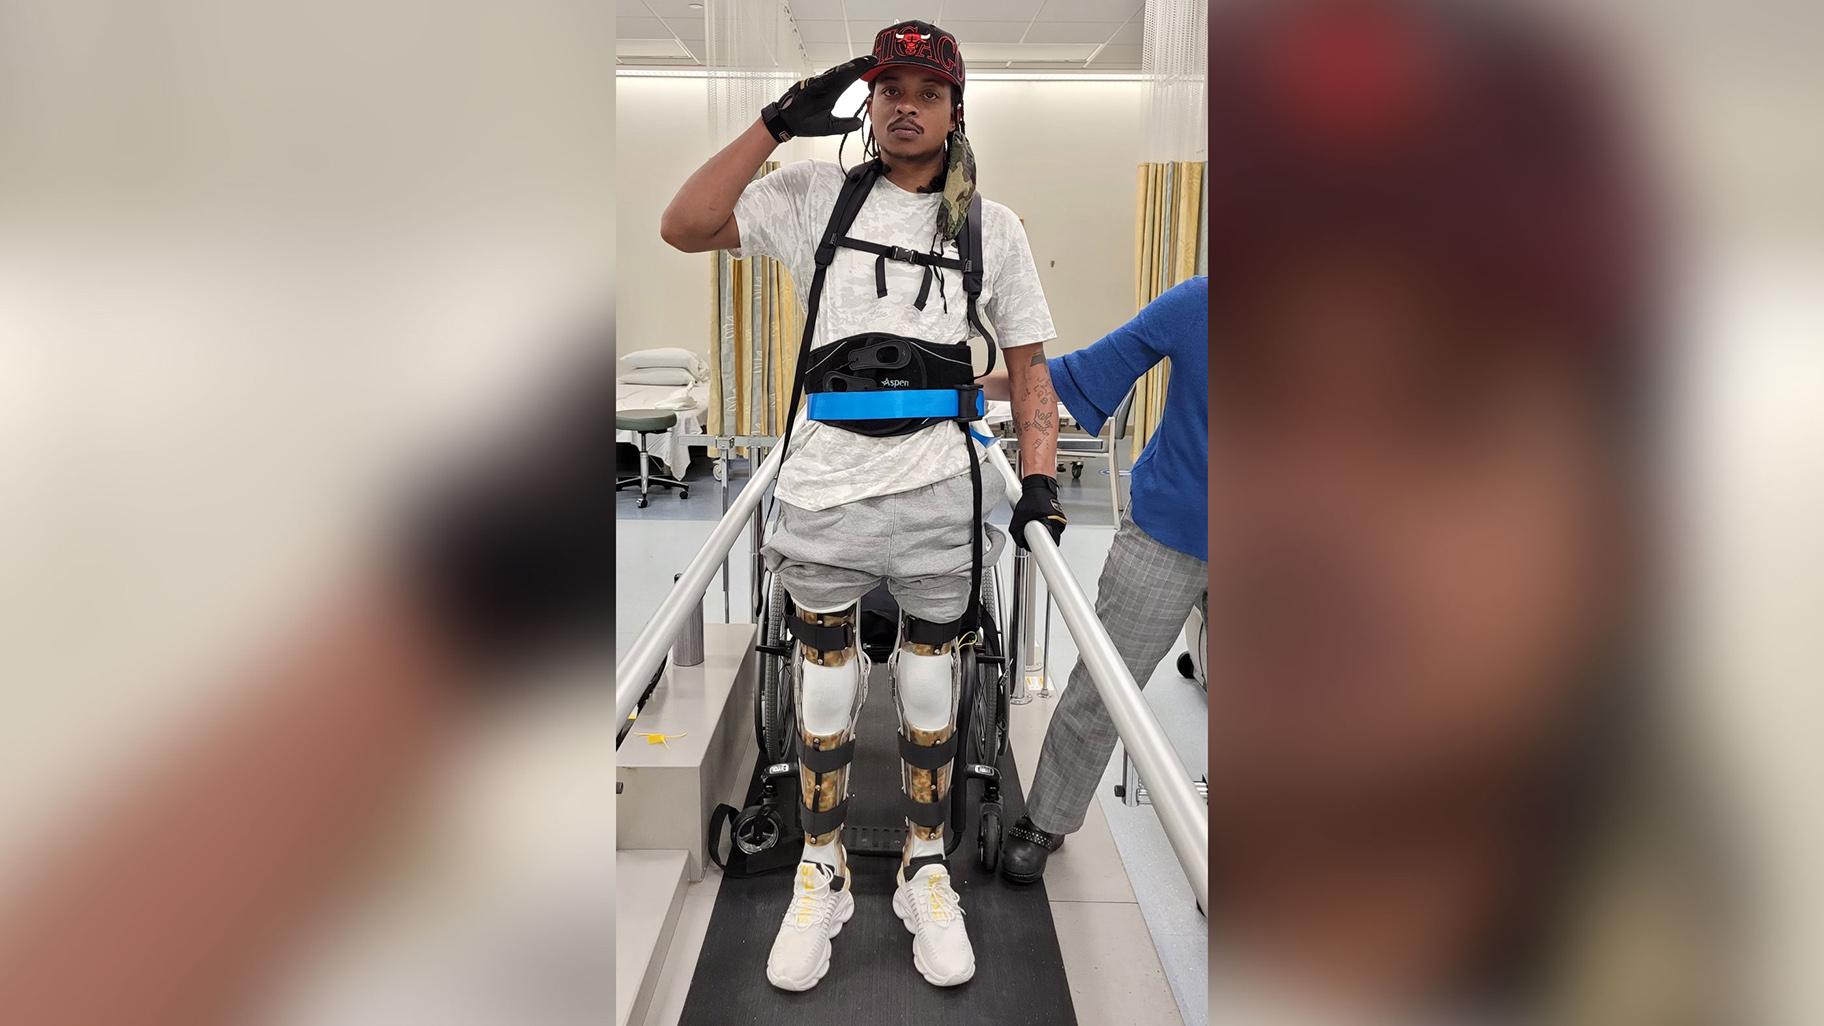 Jacob Blake fully stands on heavily braced legs during a mid-August 2021 physical rehabilitation session. (Courtesy Jacob Blake)